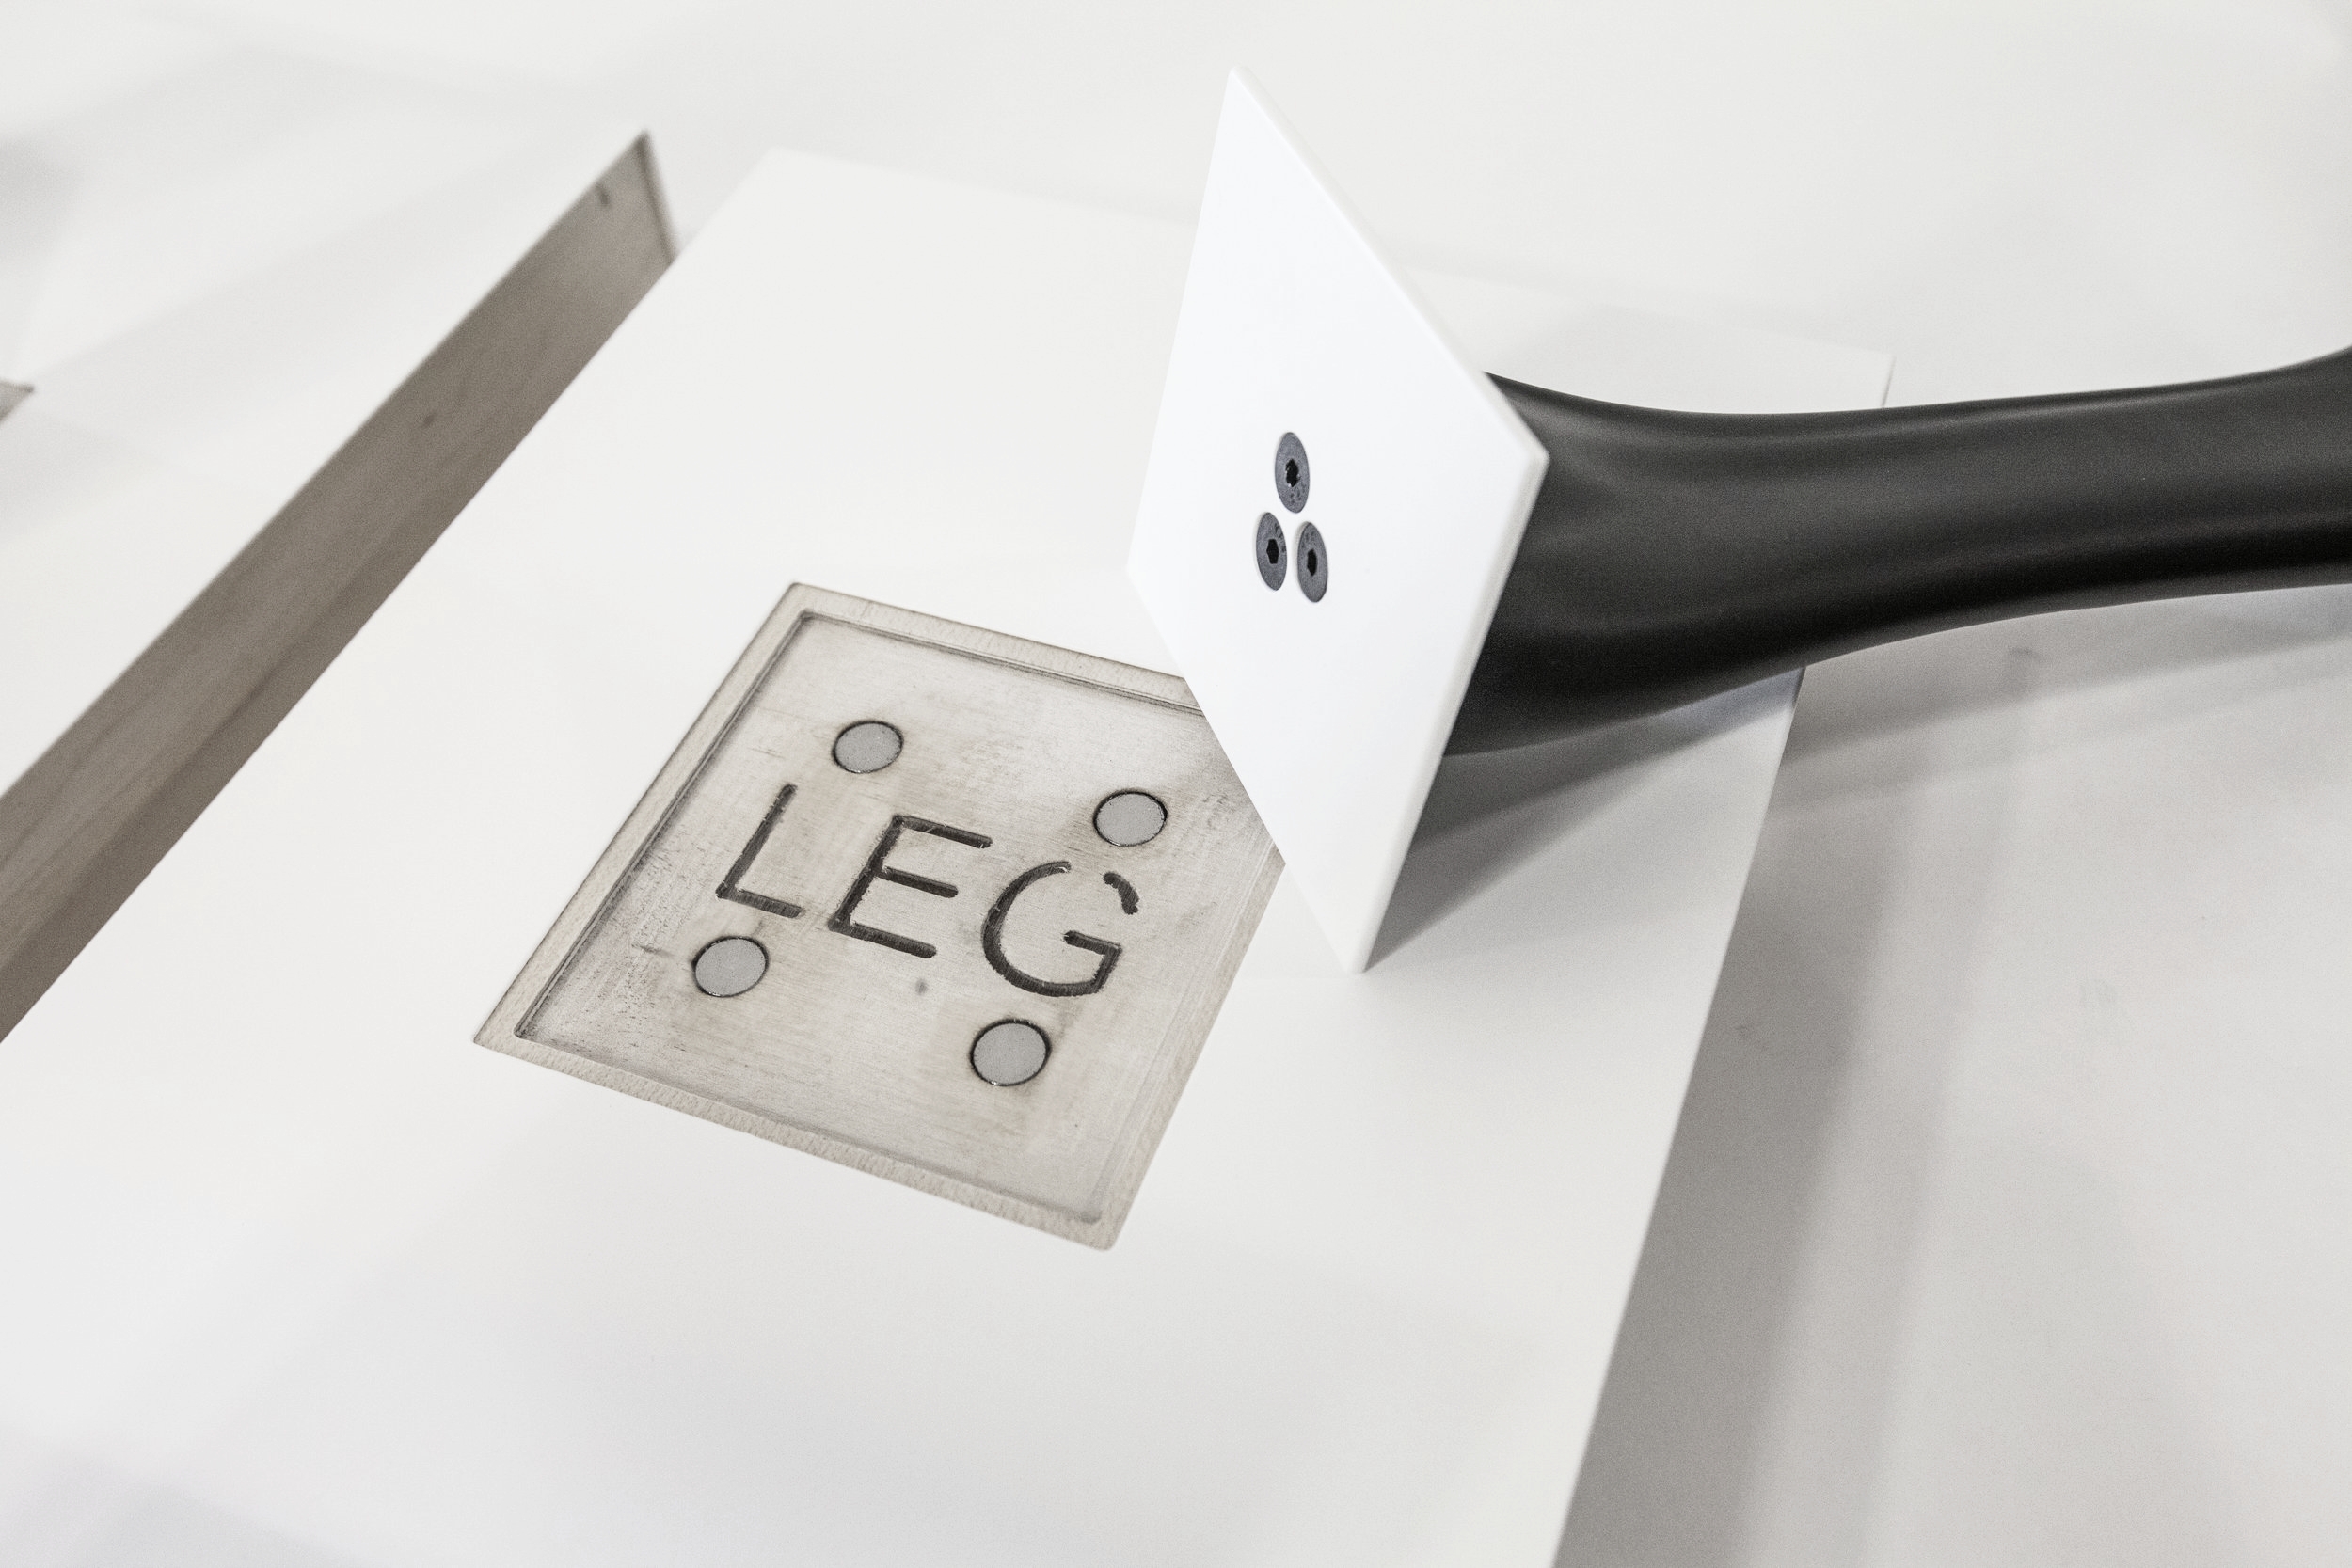  A strong magnetic catch is fabruicated to hold this 3D printed leg sample in an upright position without visable fasteners. 